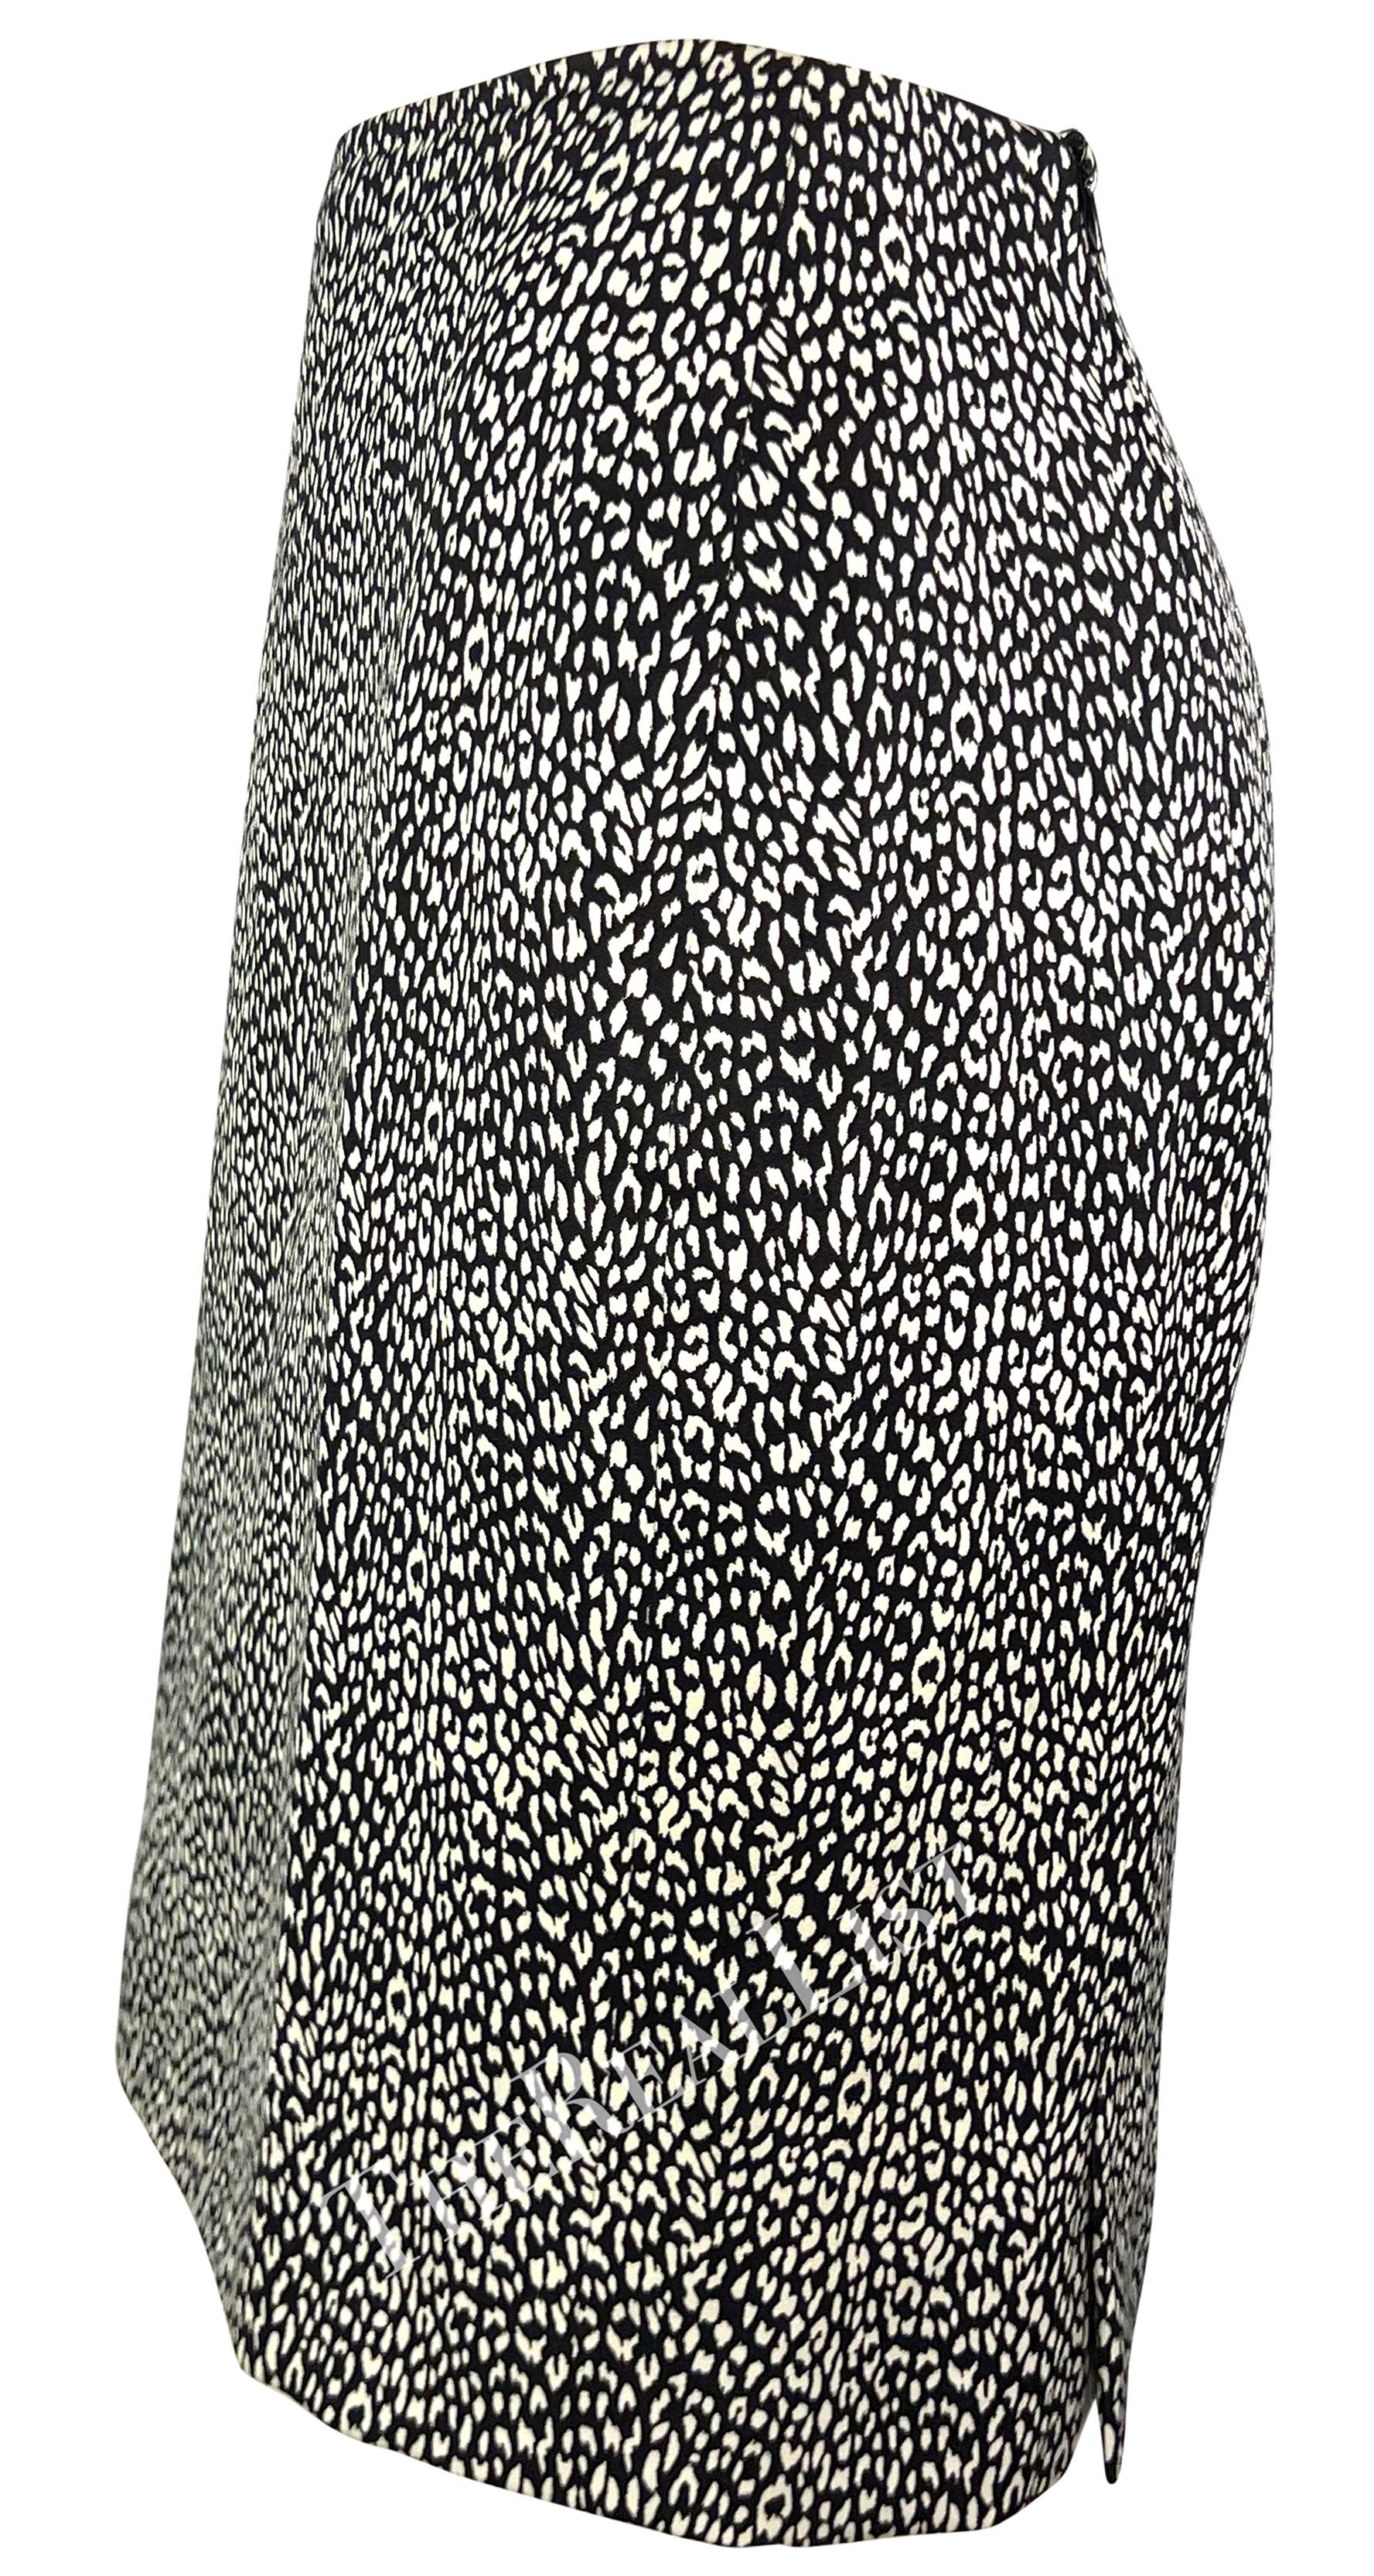 F/W 1996 Gianni Versace Couture Black White Cheetah Print Pencil Skirt  In Excellent Condition For Sale In West Hollywood, CA